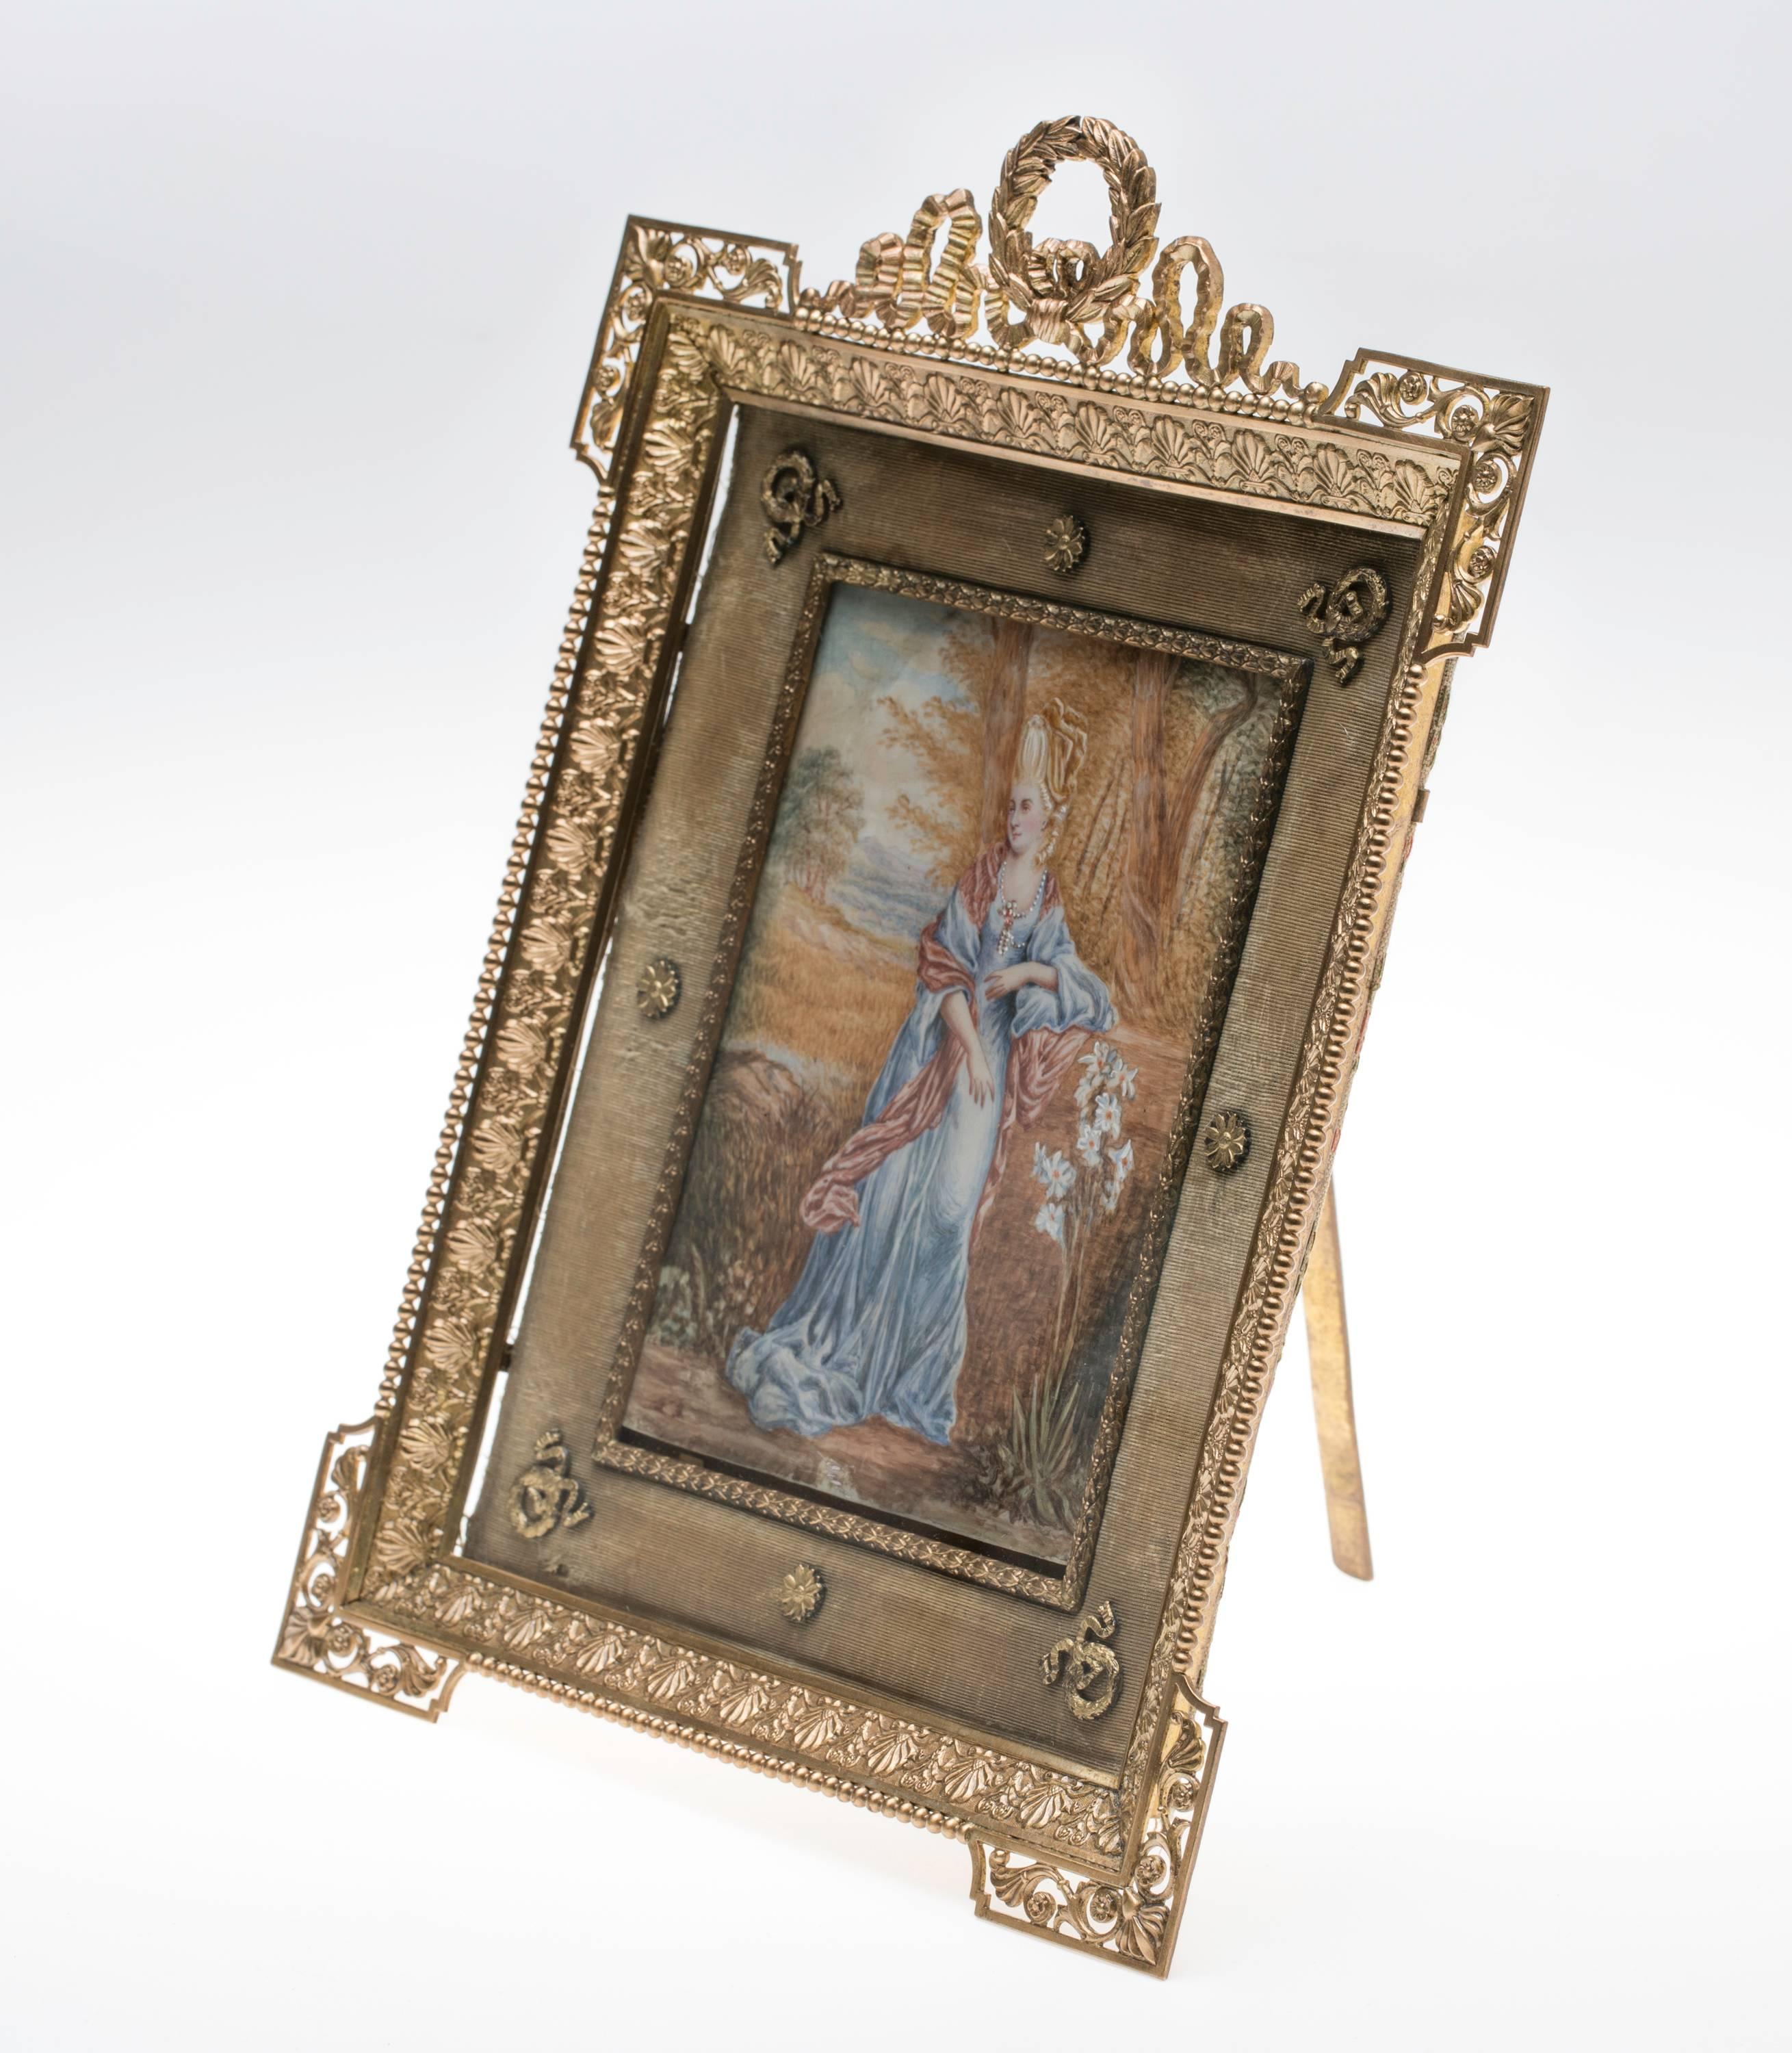 Lovely 1930s gilt bronze picture frame. Decoratively made with wreath and ribbons. Velvet inset frame.